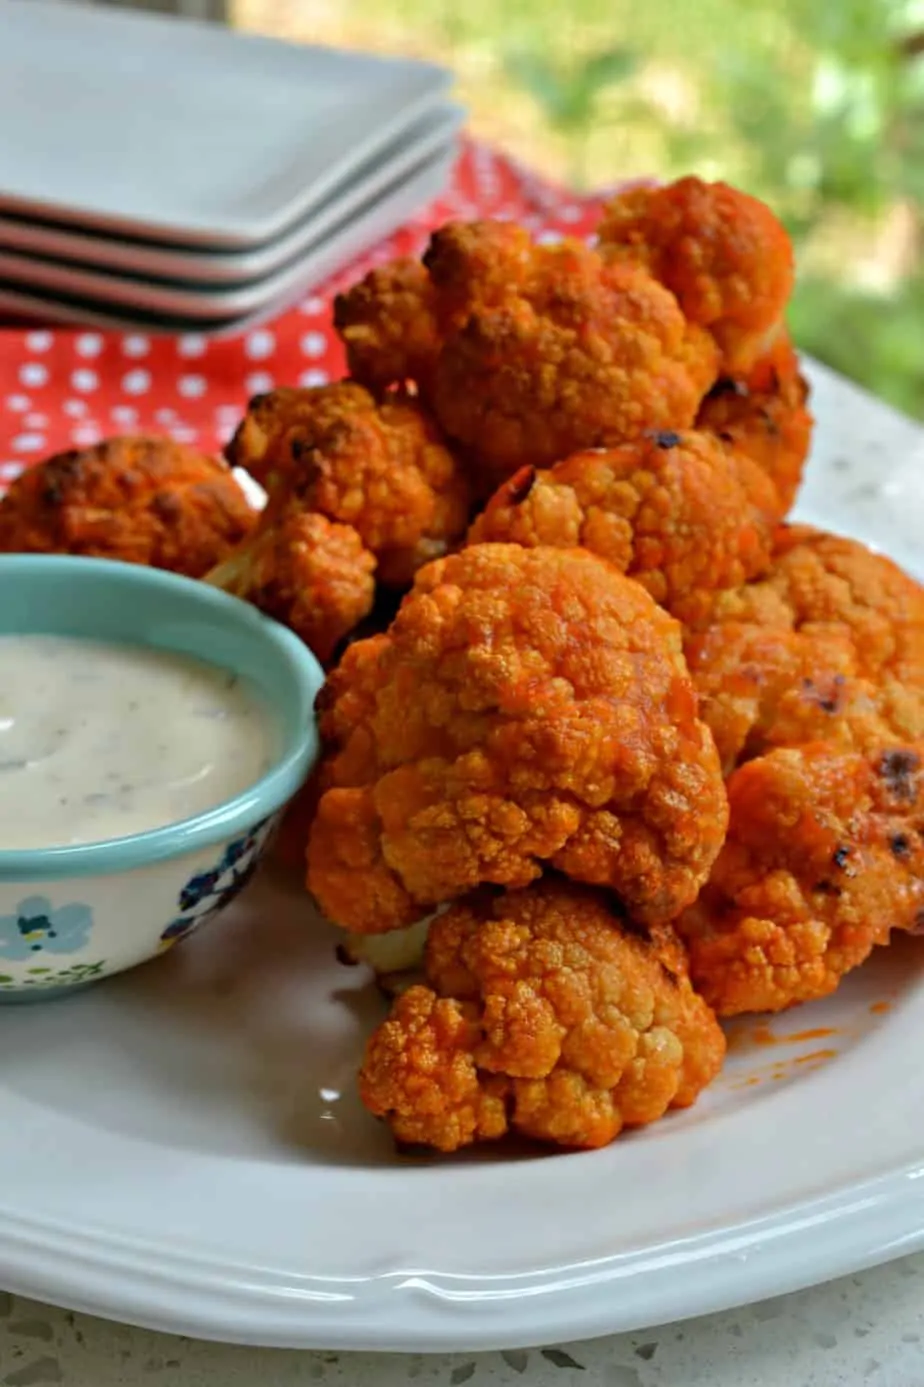 These delectable Buffalo Cauliflower bites are just as tasty as buffalo chicken with a lot less fat and calories.